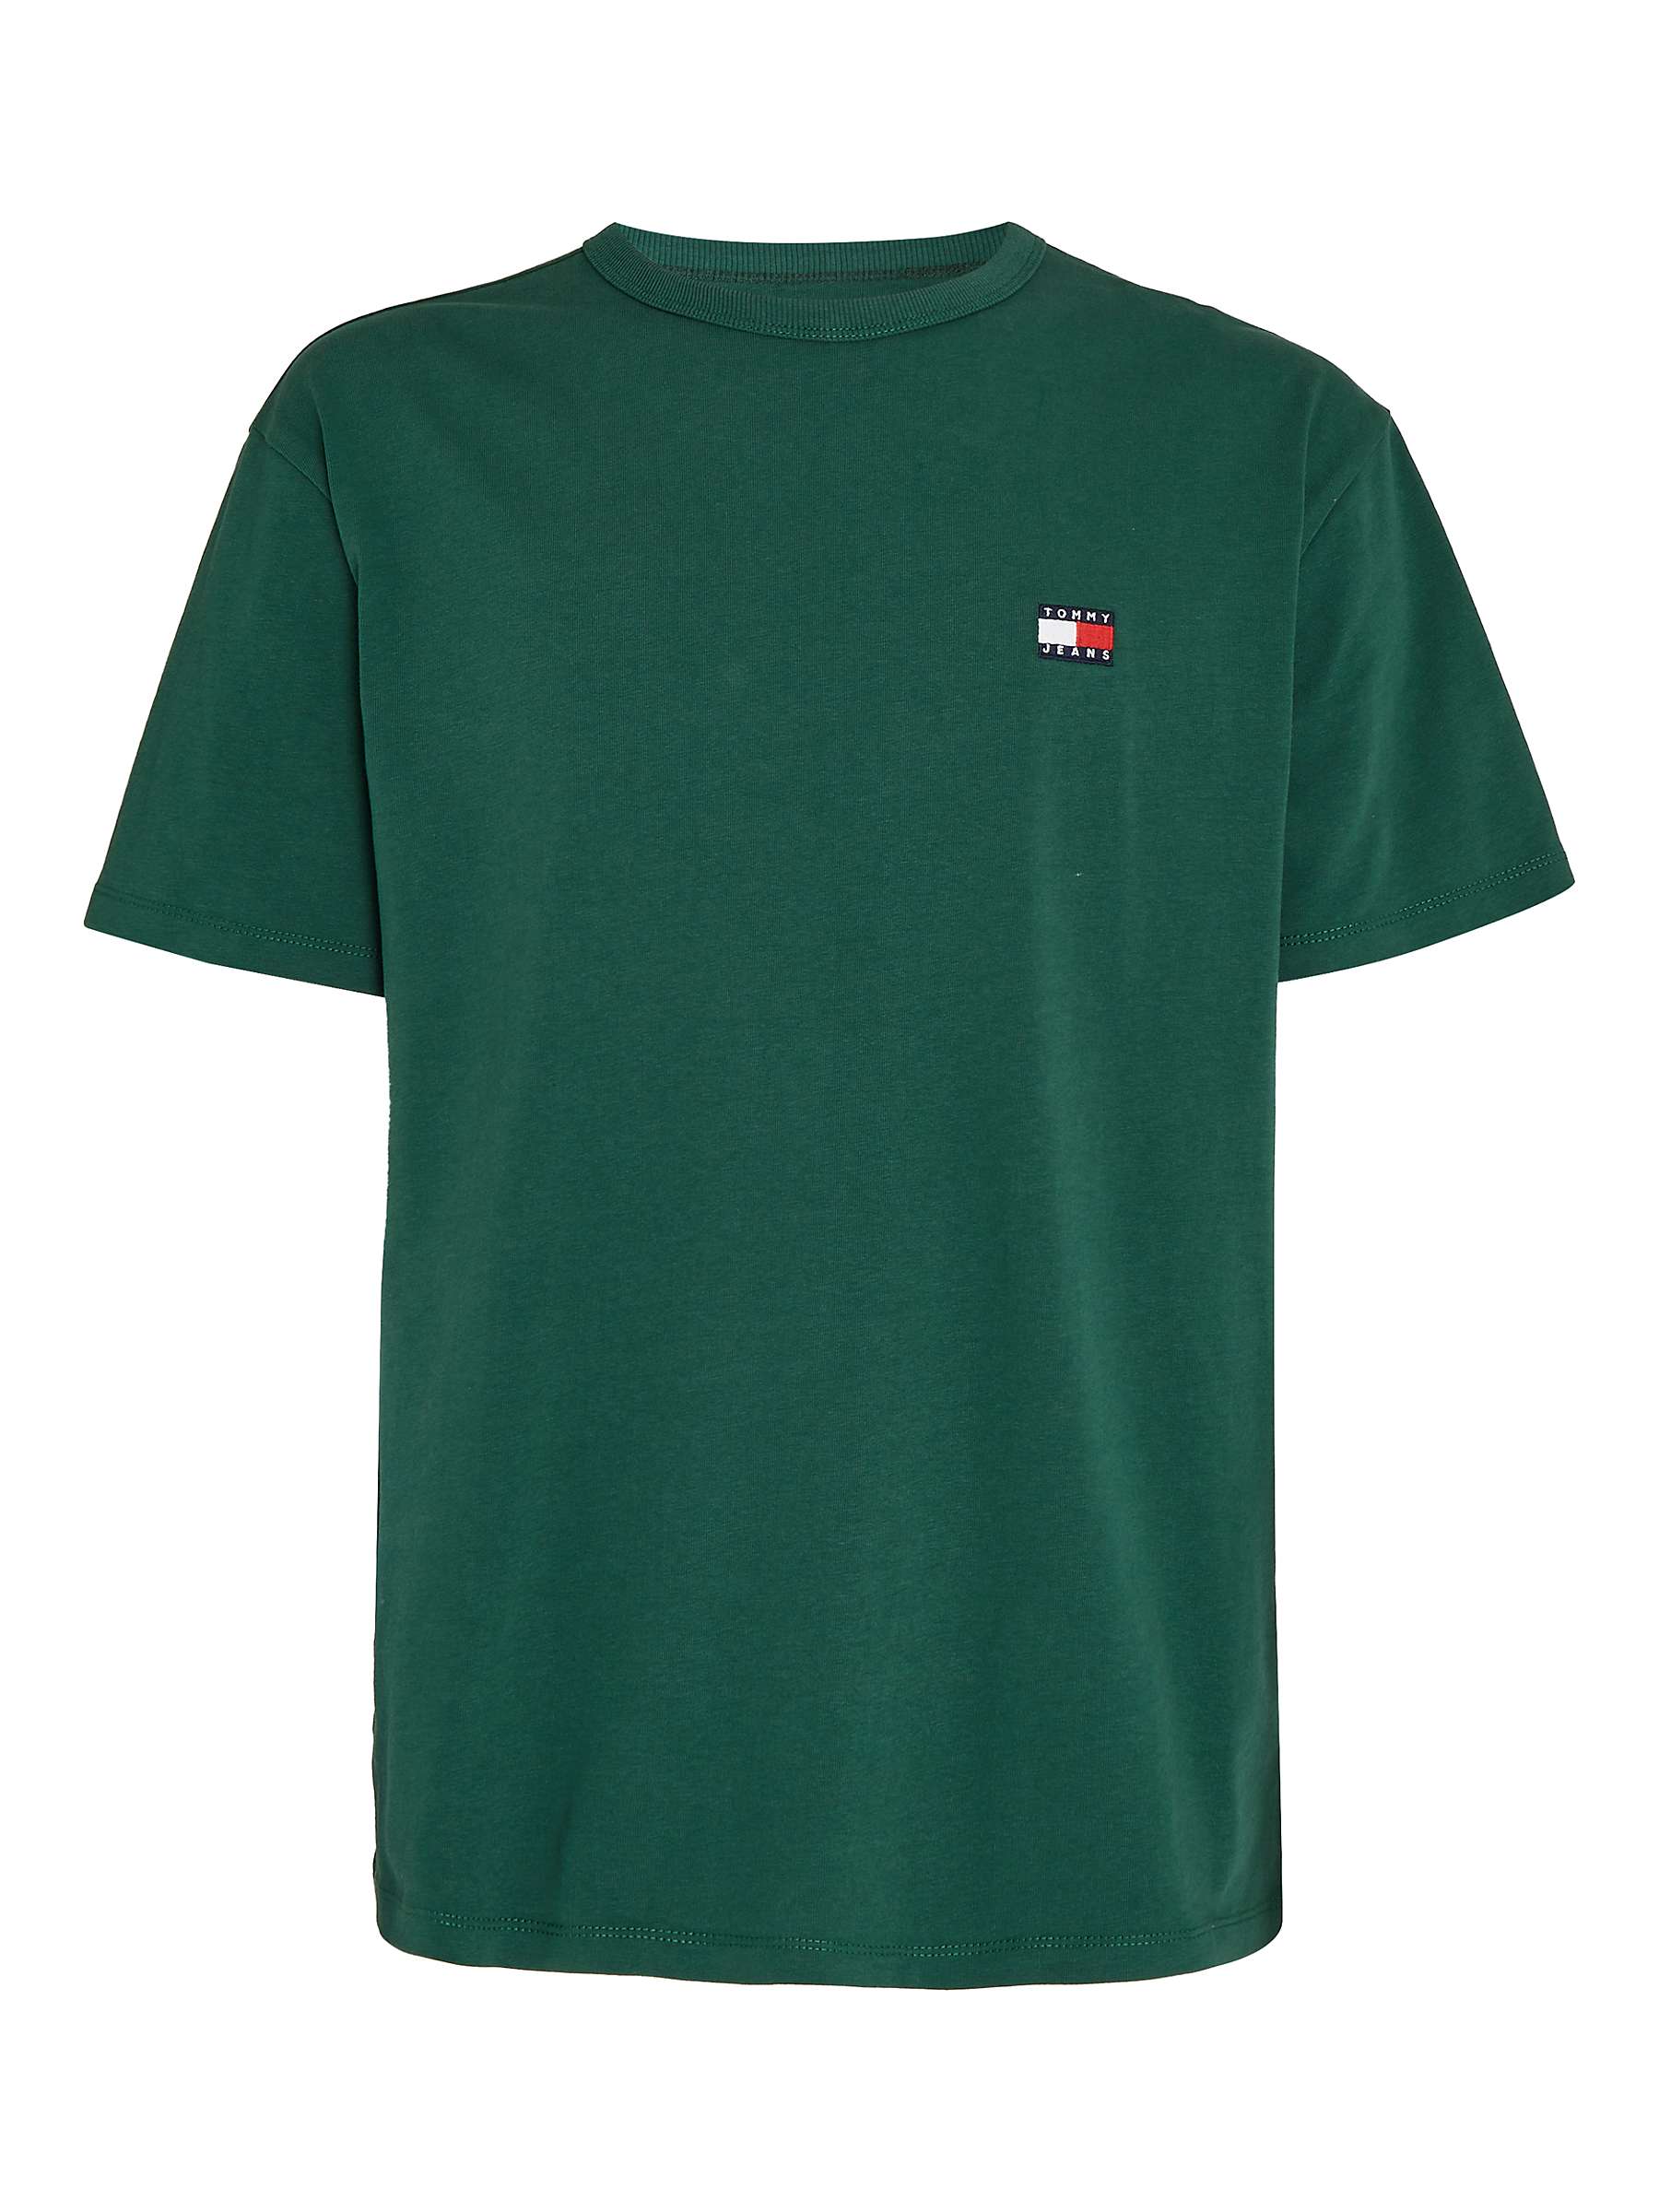 Buy Tommy Hilfiger Tommy Jeans Badge Cotton T-Shirt, Court Green Online at johnlewis.com